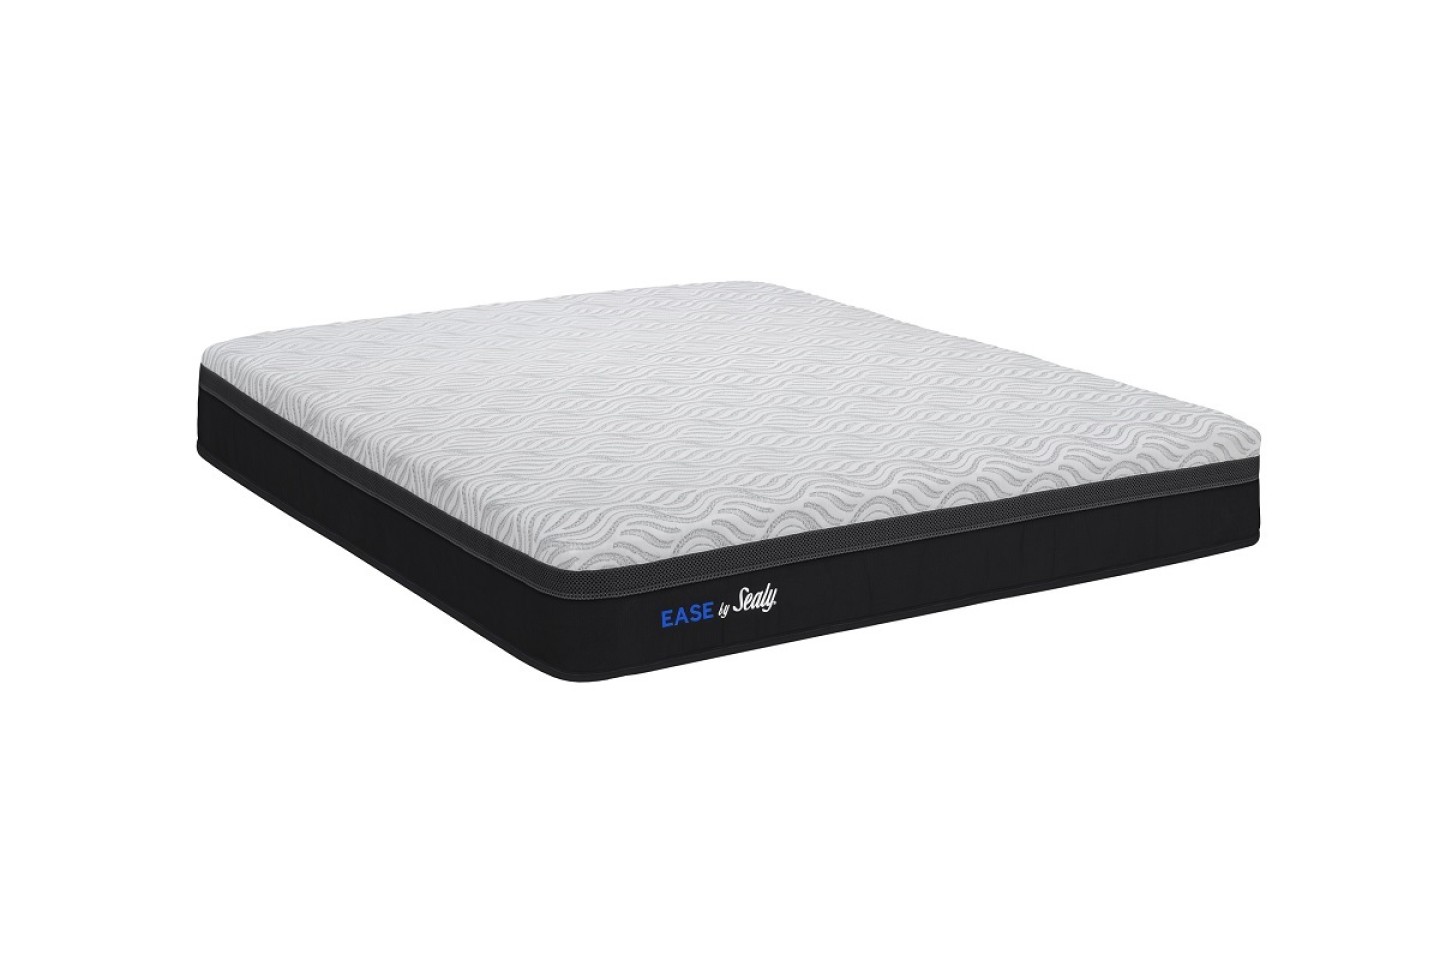 THE EASE MATTRESS by Sealy